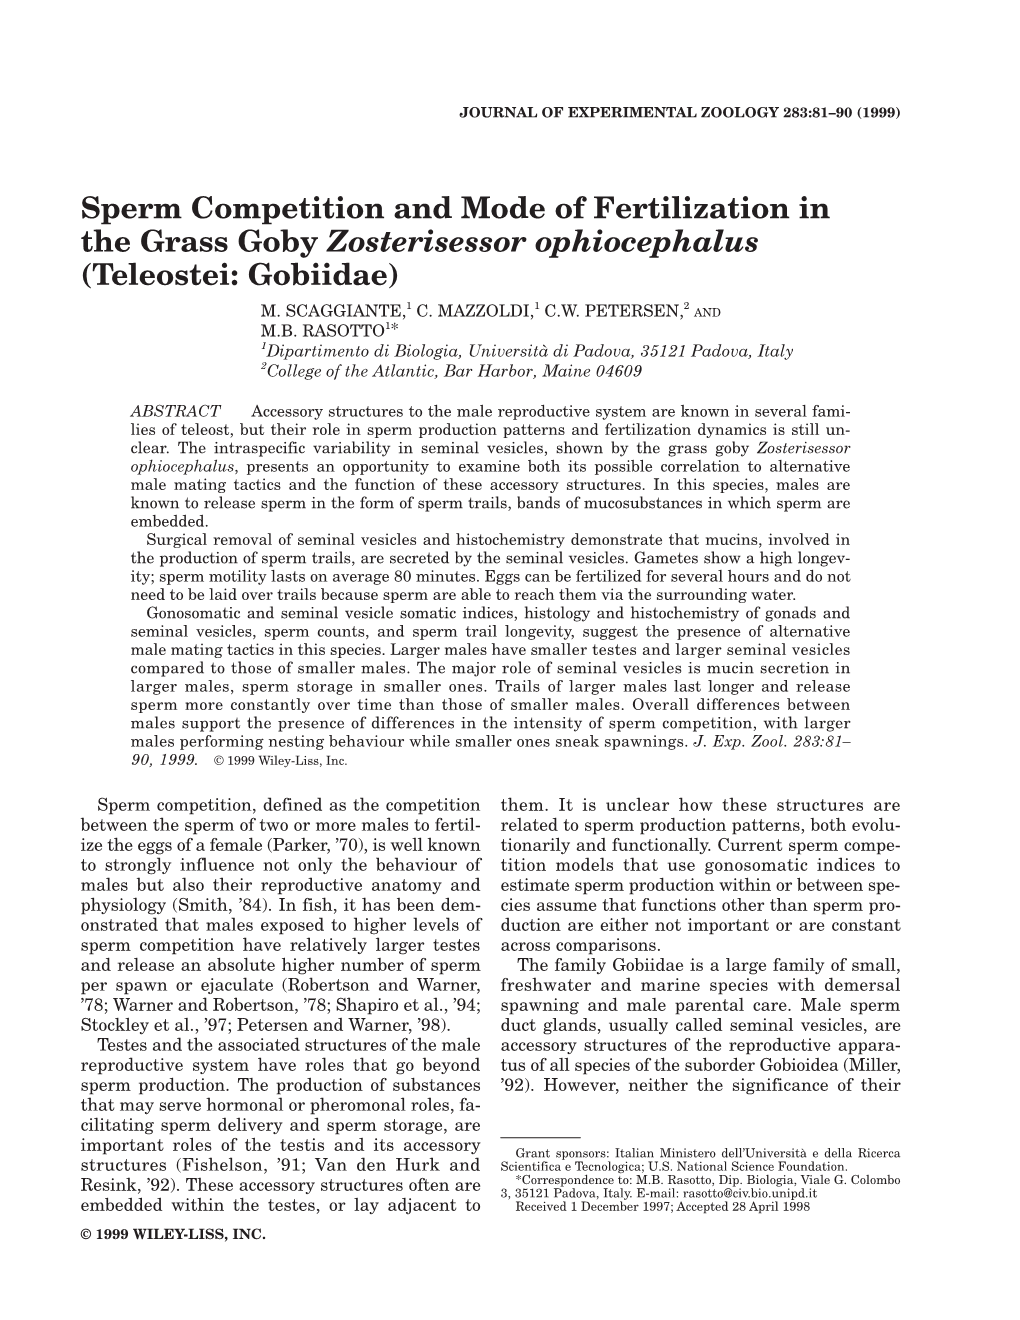 Sperm Competition and Mode of Fertilization in the Grass Goby Zosterisessor Ophiocephalus (Teleostei: Gobiidae) 1 1 2 M